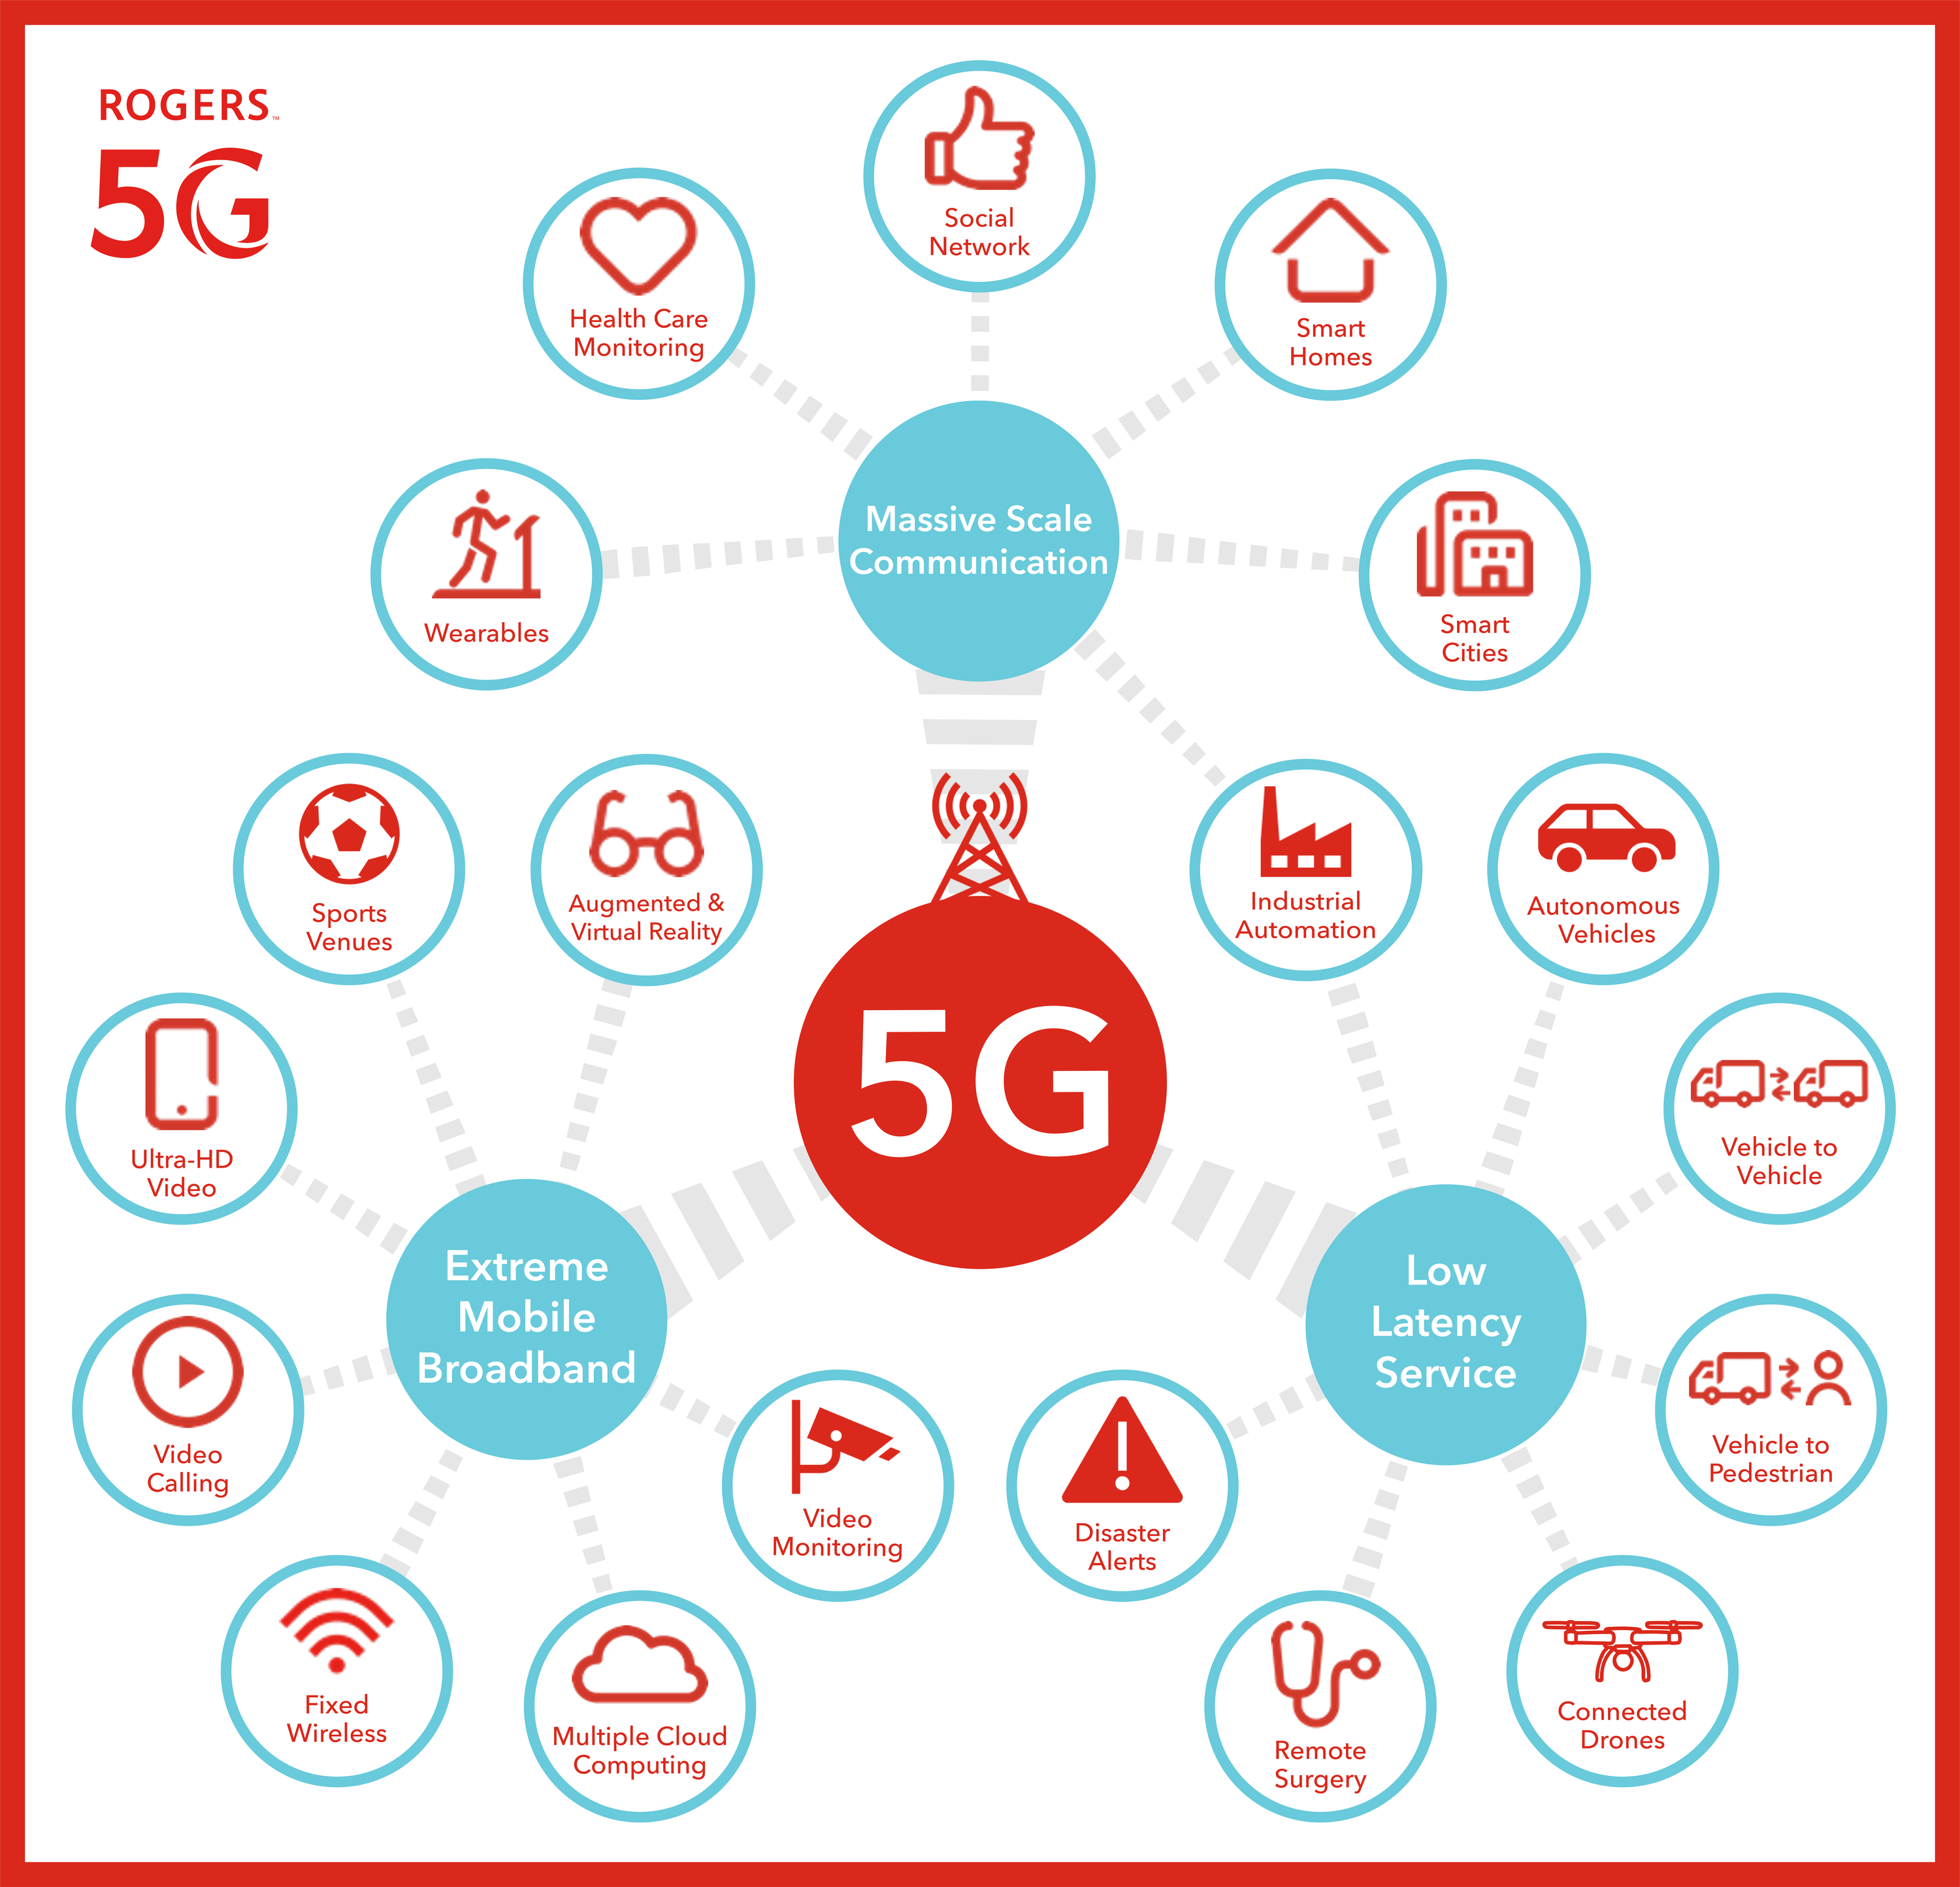 Infographic describing the applications of 5G with three main branches. The first branch is massive scale communication with secondary branches for wearables, health care monitoring, social network, smart homes, smart cities, and industrial automation. The second branch is extreme mobile broadband with secondary branches for augmented and virtual reality, sports venues, ultra-HD video, video calling, fixed wireless, multiple cloud computing, and video monitoring. The third branch is low latency service with secondary branches for industrial automation, autonomous vehicle, vehicle to vehicle, vehicle to pedestrian, connected drones, remote surgery, and disaster alerts. 